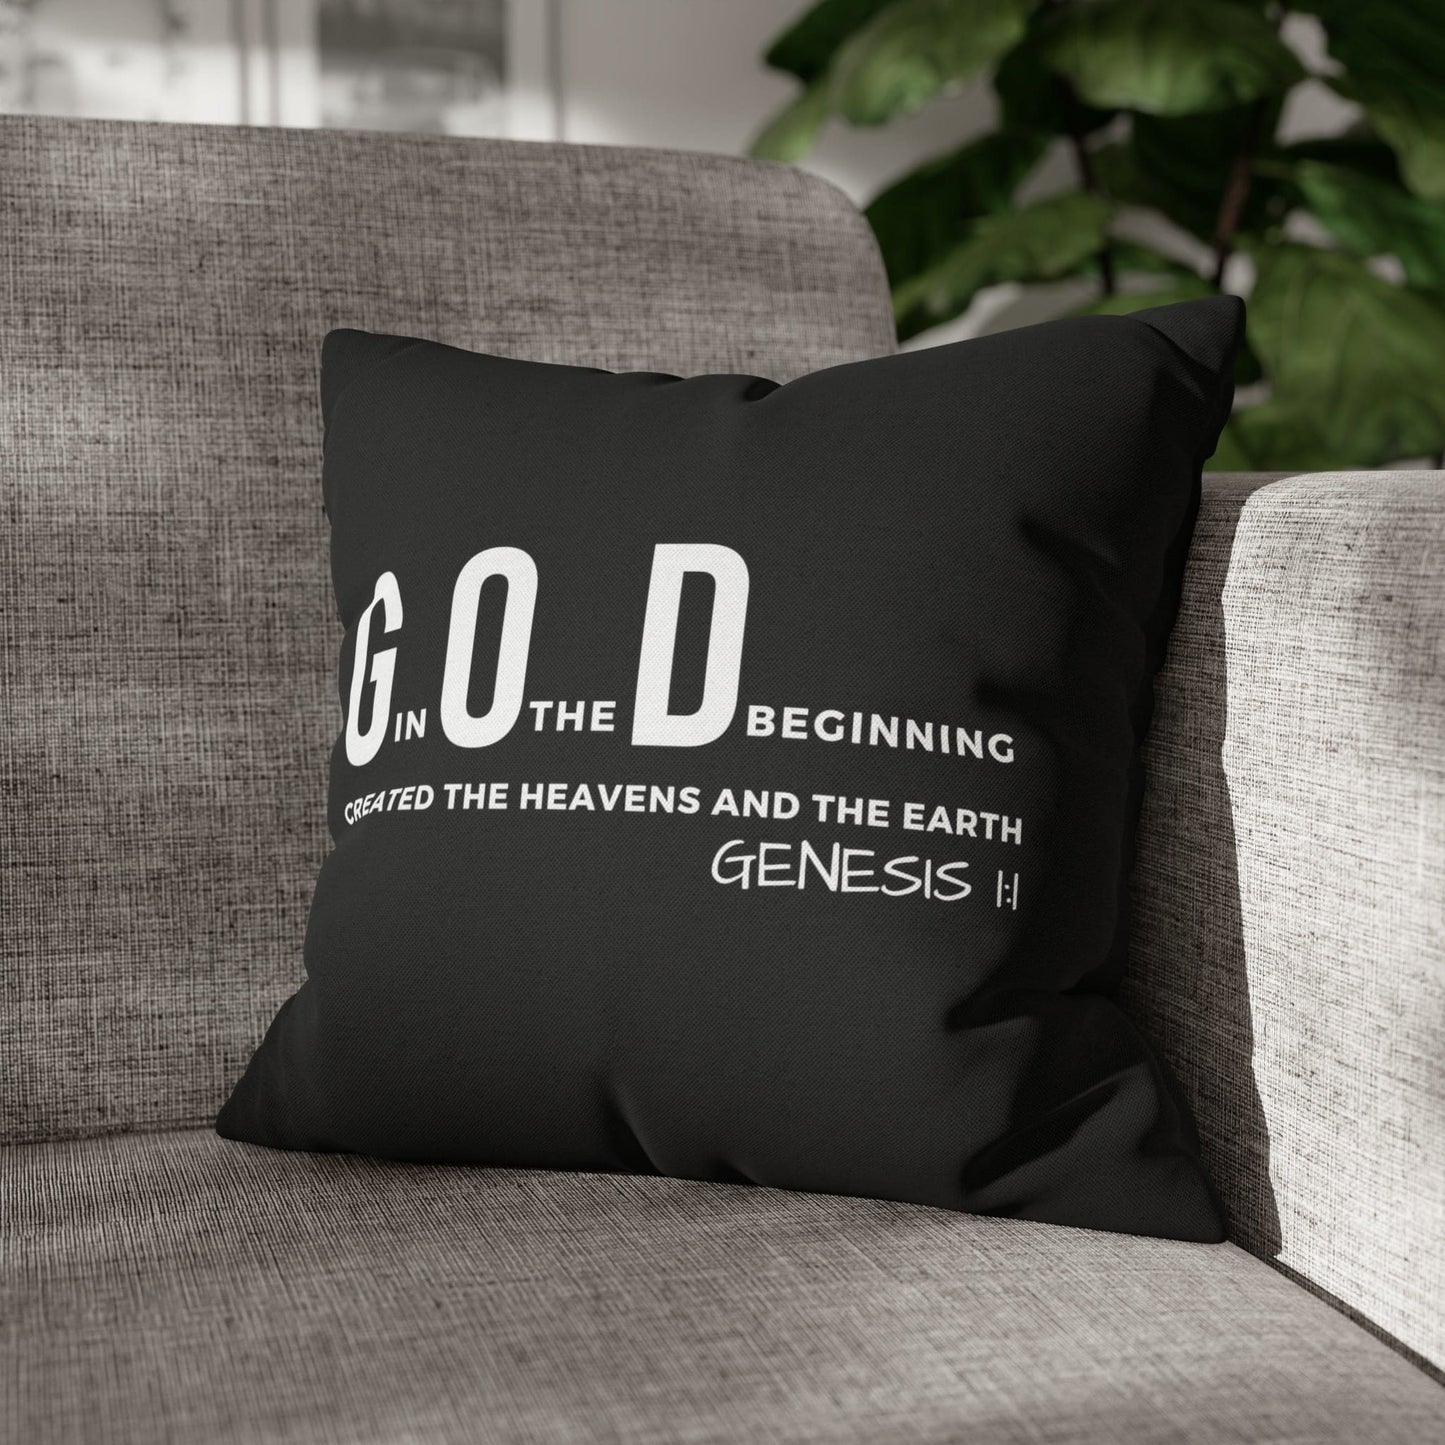 Decorative Throw Pillow Cover - Set Of 2, God In The Beginning Created The Heavens And The Earth - Scripture Verse-20